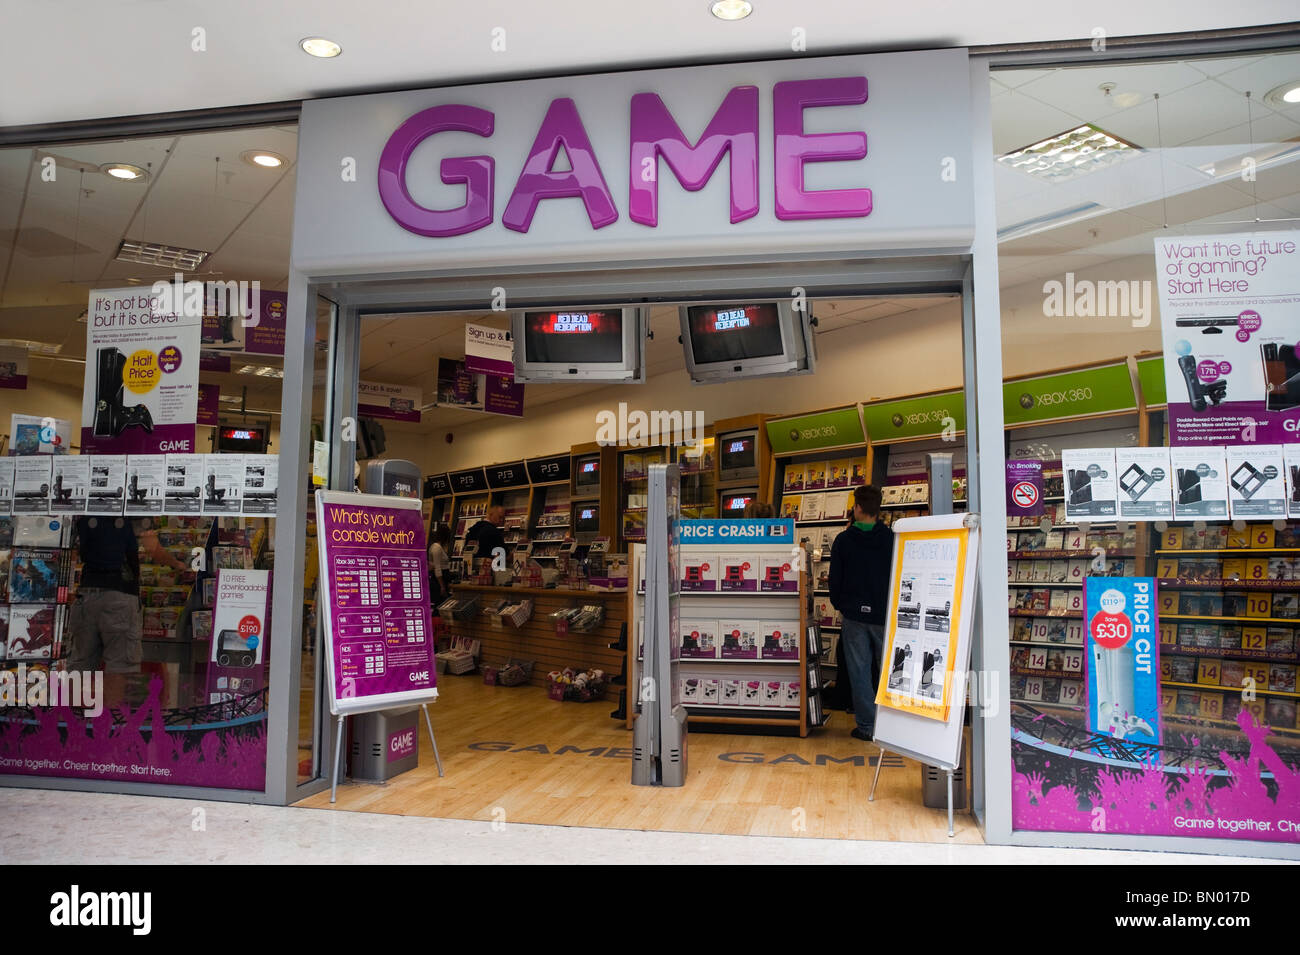 Game Shop Selling Computer Games In Swansea South Wales Uk Stock Photo Alamy